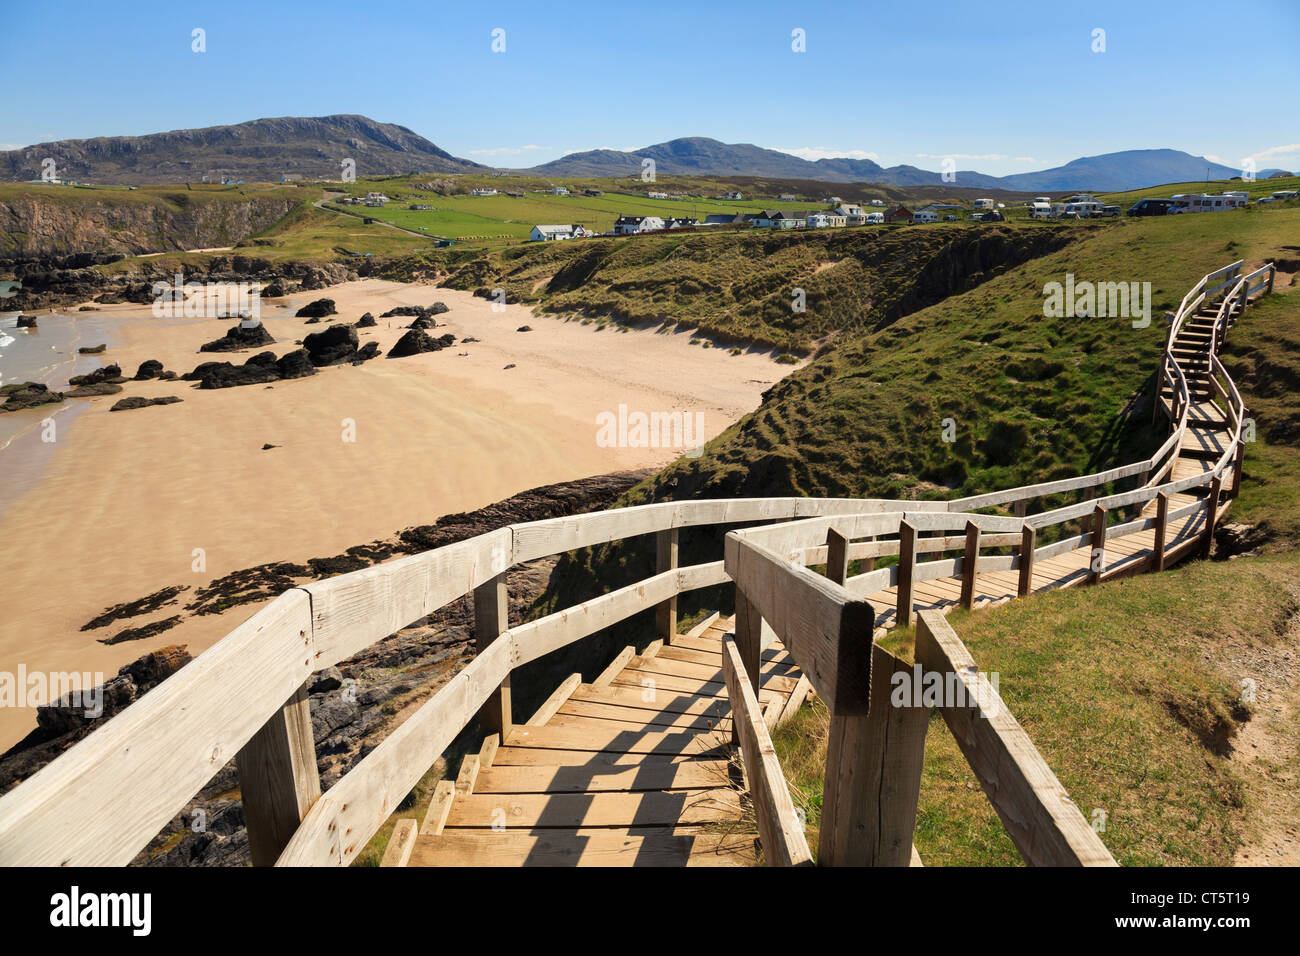 Wooden steps to viewpoint overlooking sandy beach and blue sea on scenic Scottish North Coast 500 route at Sango Bay Sutherland Scotland UK Stock Photo